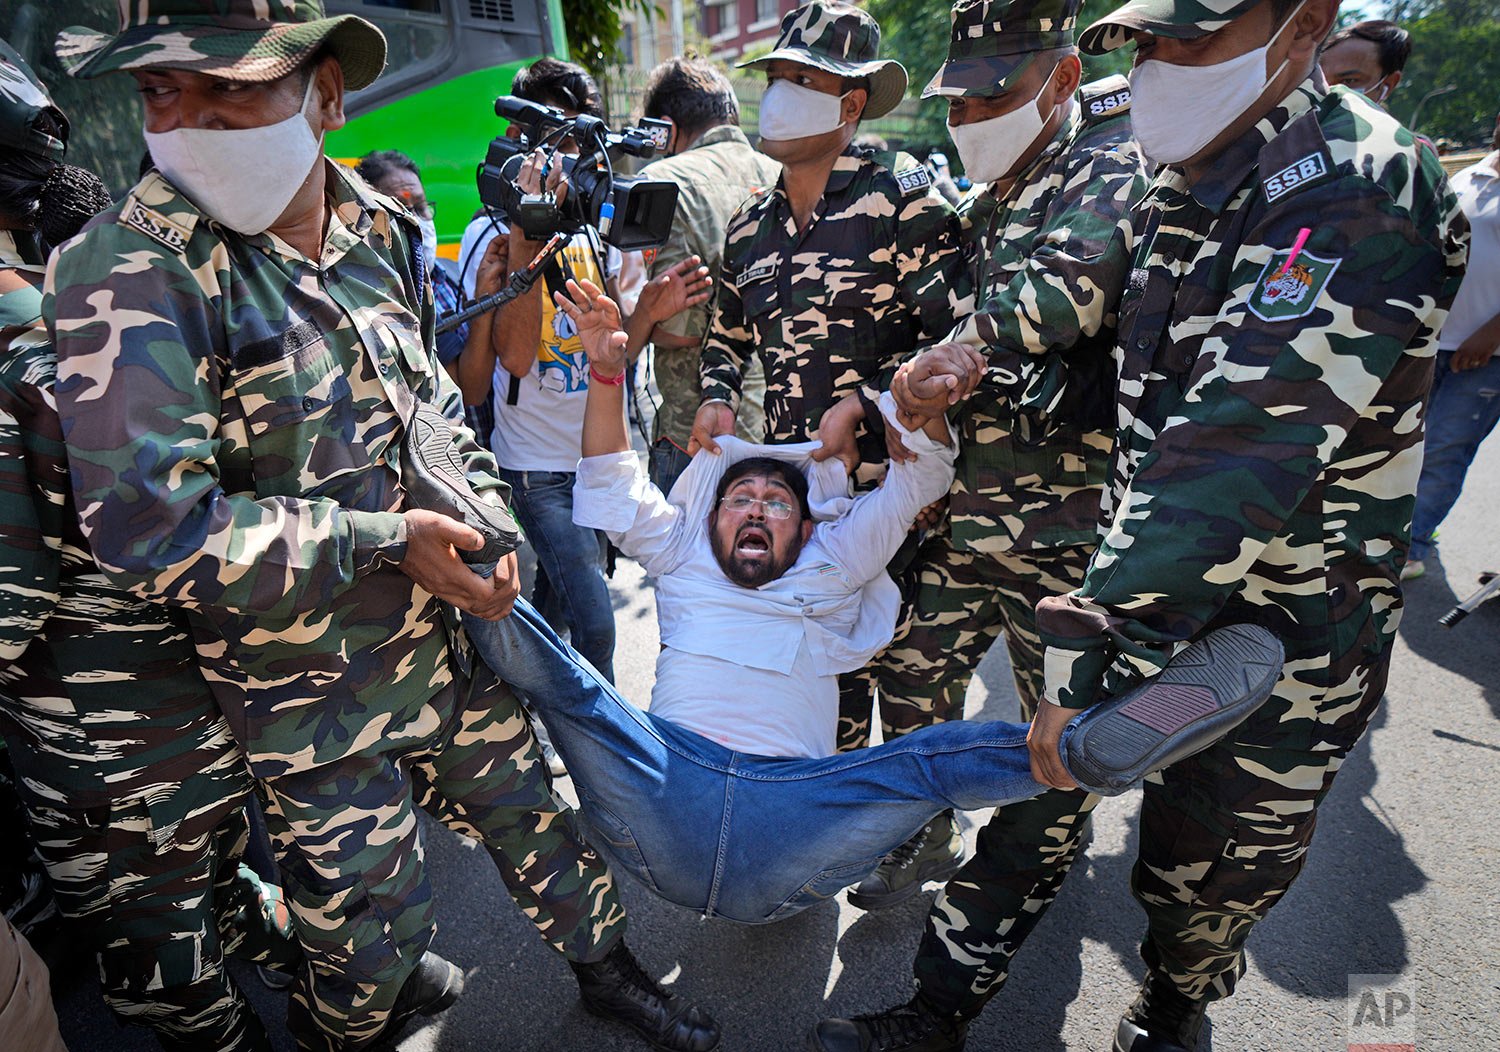  Paramilitary force soldiers detain an activist of Congress party's youth wing protesting against Sunday's killing of four farmers in Uttar Pradesh state after being run over by a car owned by India's junior home minister in New Delhi, India, Monday,